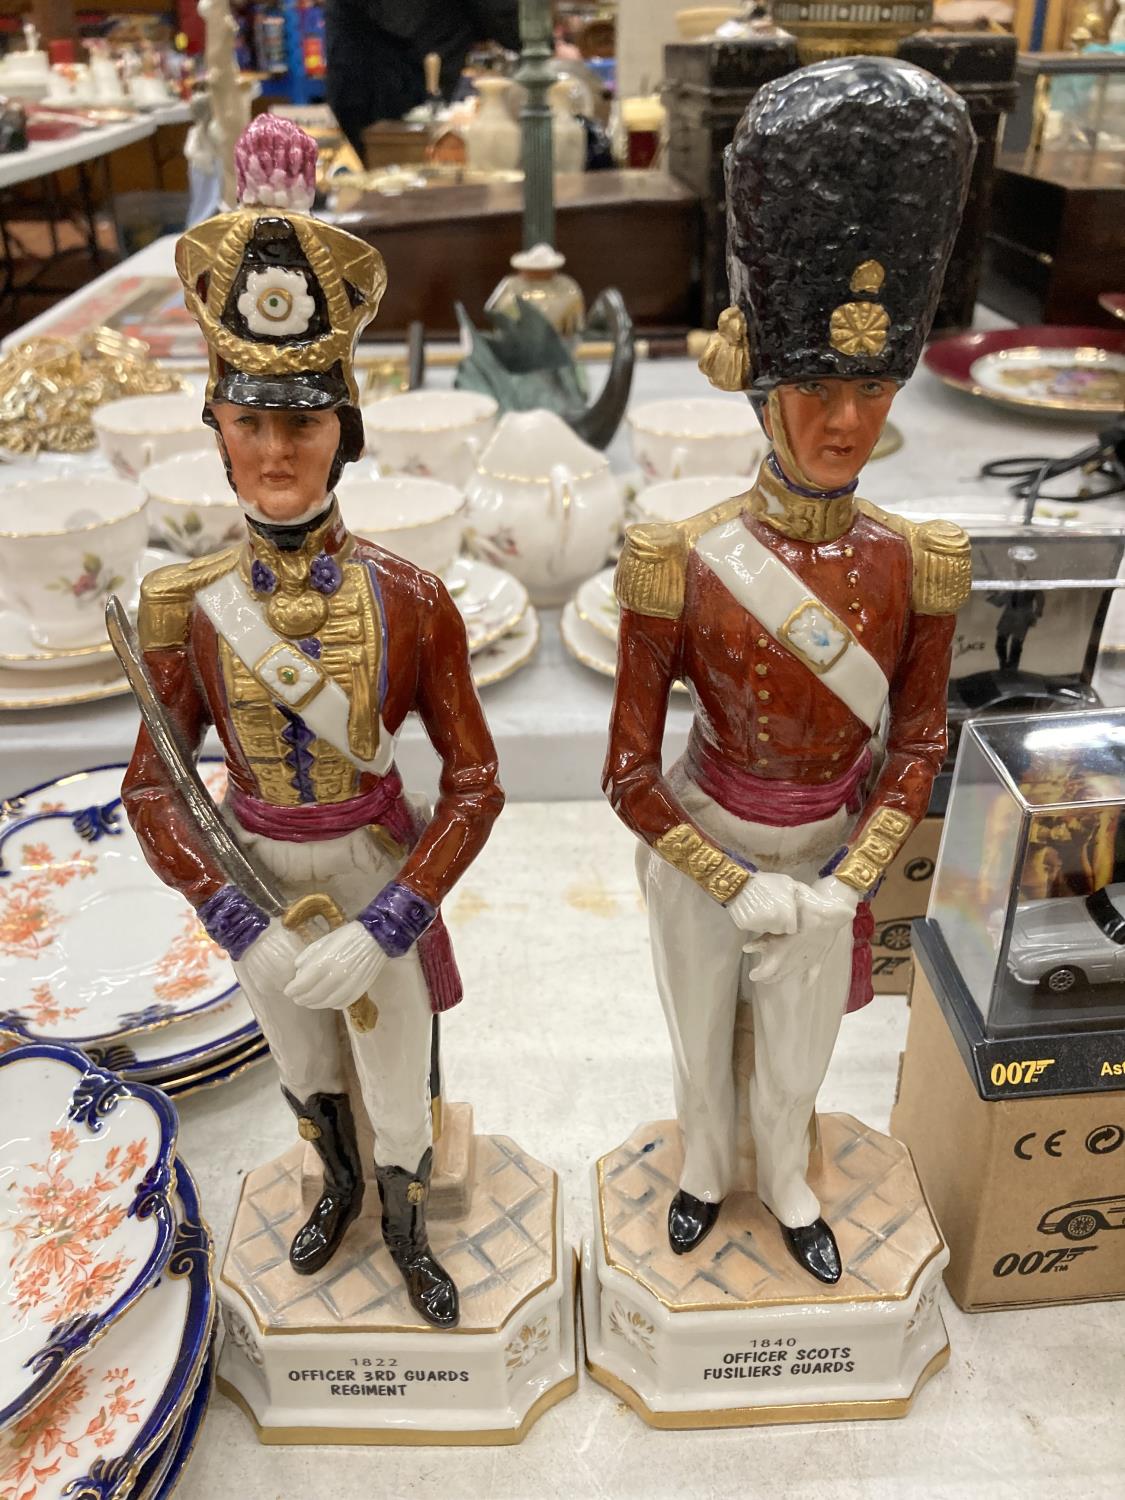 FOUR CERAMIC SOLDIER FIGURES TO INCLUDE OFFICER 3RD GUARDS REGIMENT, OFFICER SCOTS FUSILIER - Image 5 of 5